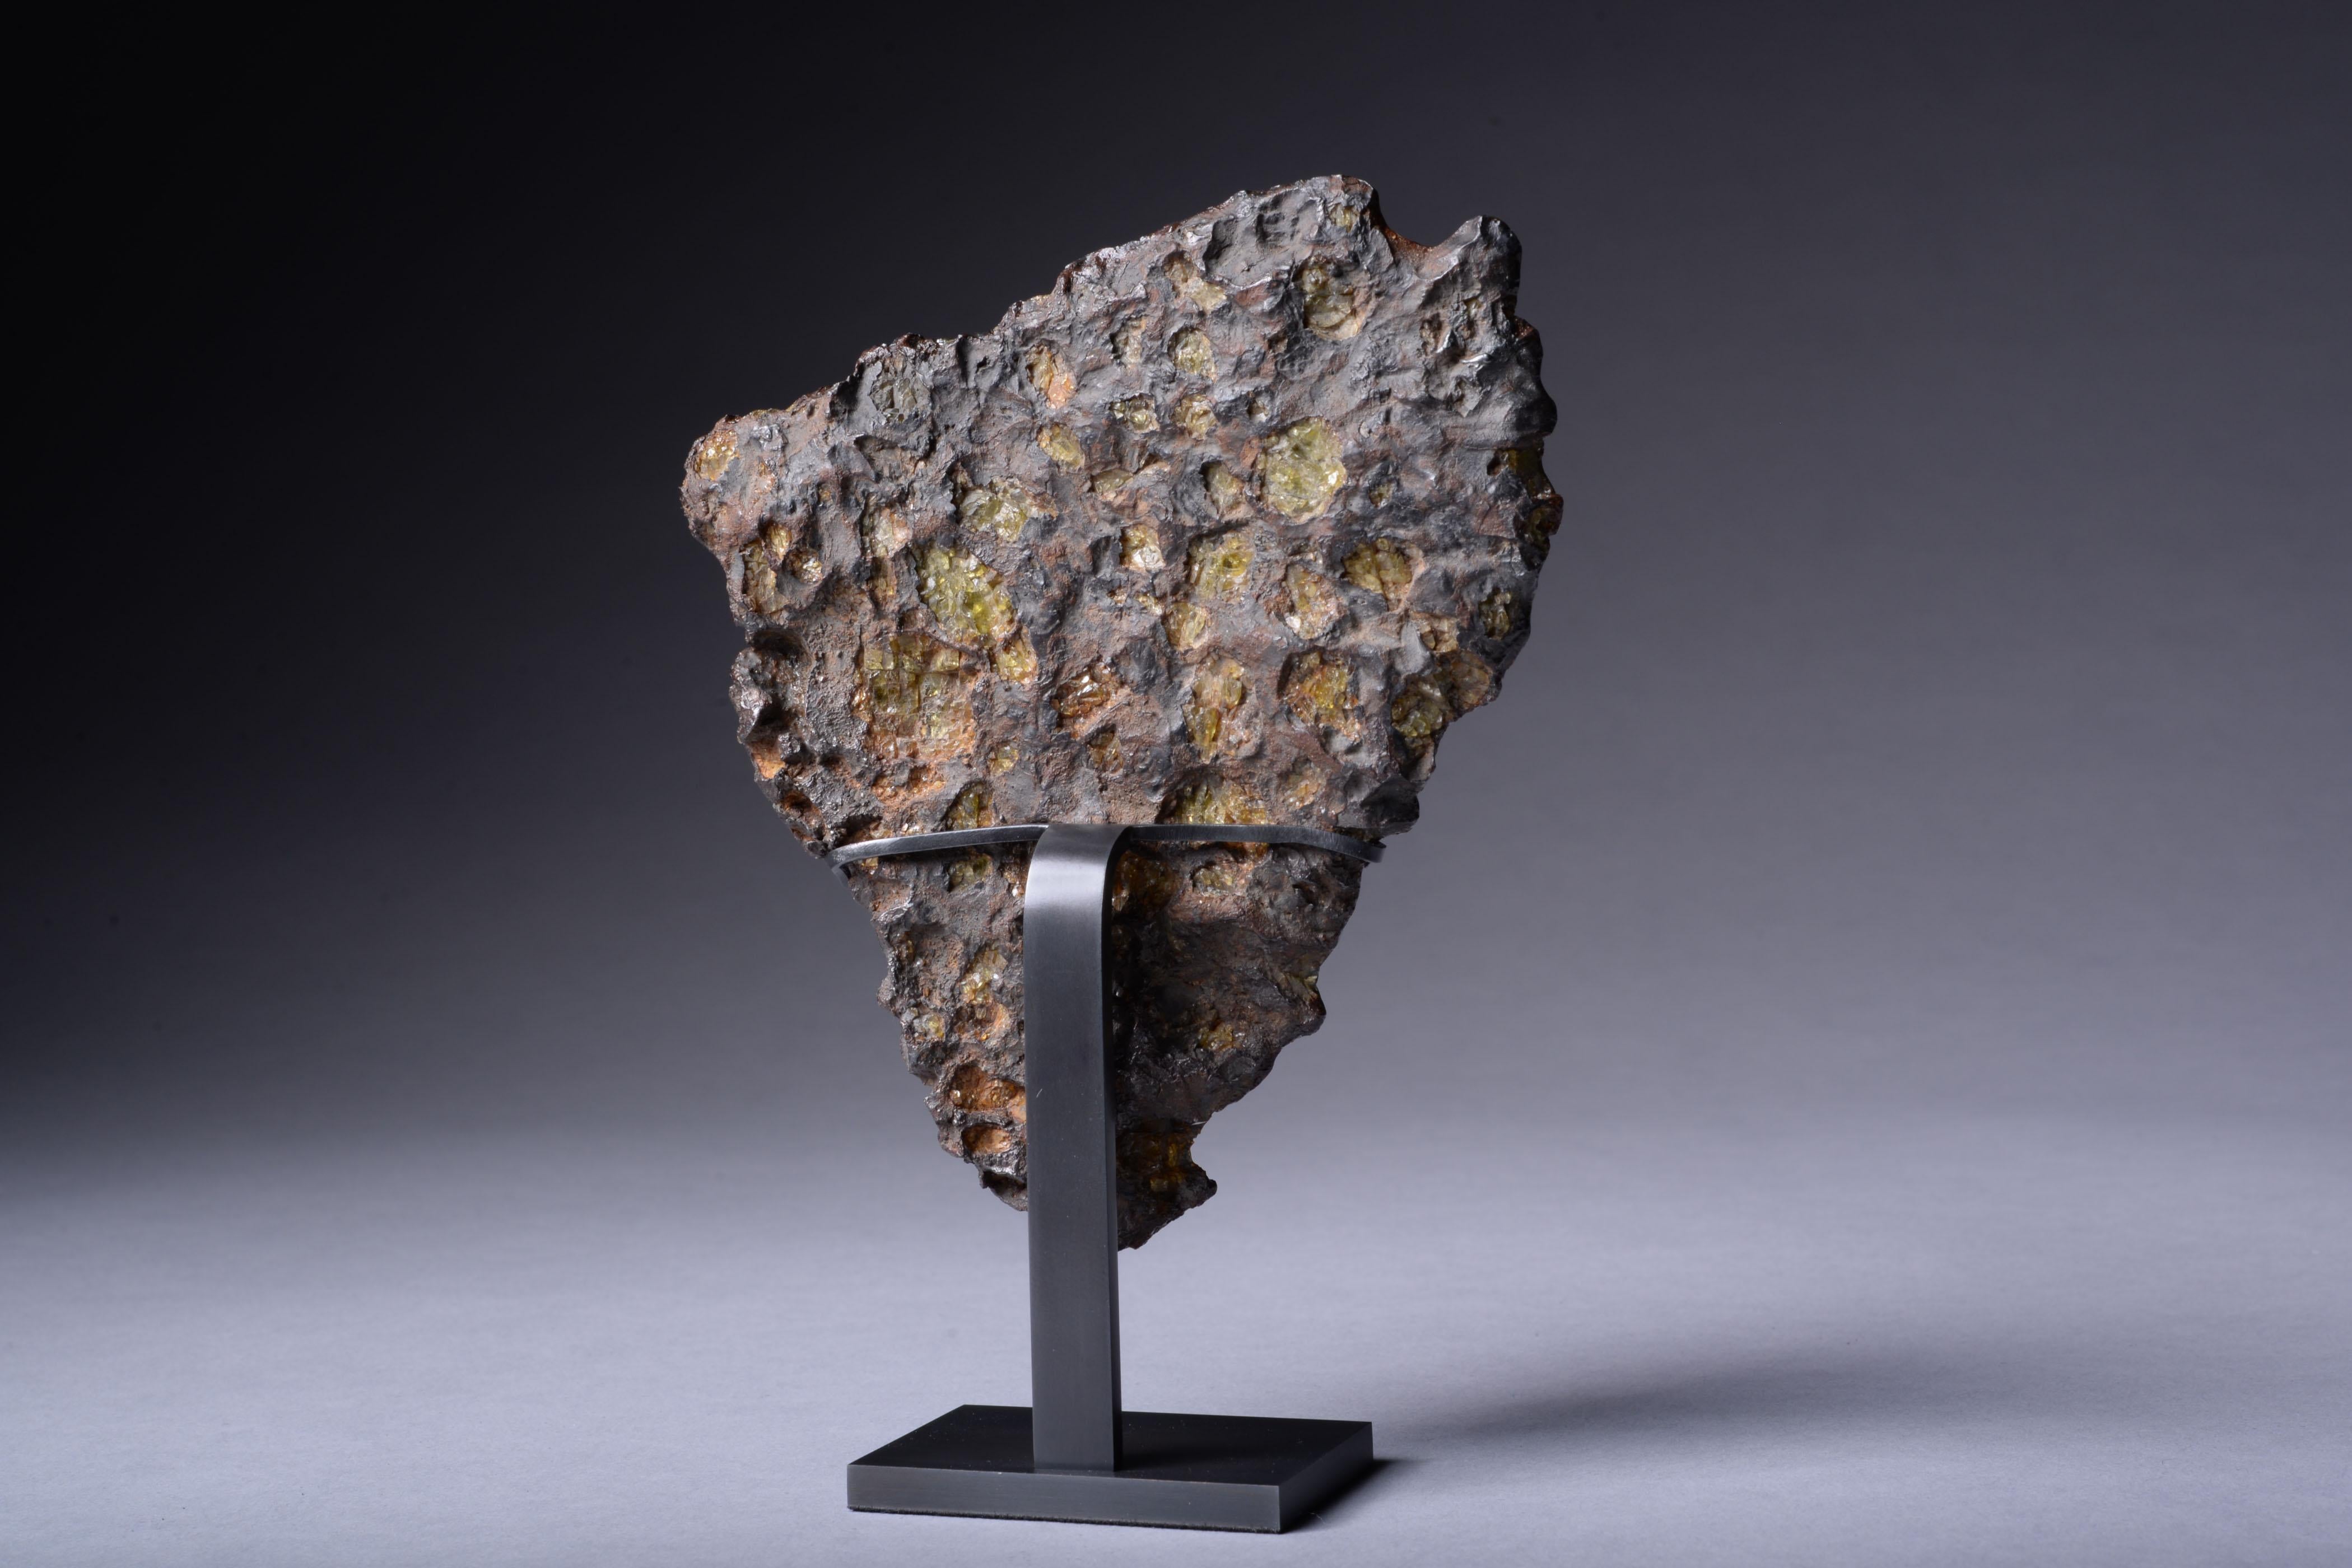 Chilean End-Cut from the Imilac Meteorite For Sale